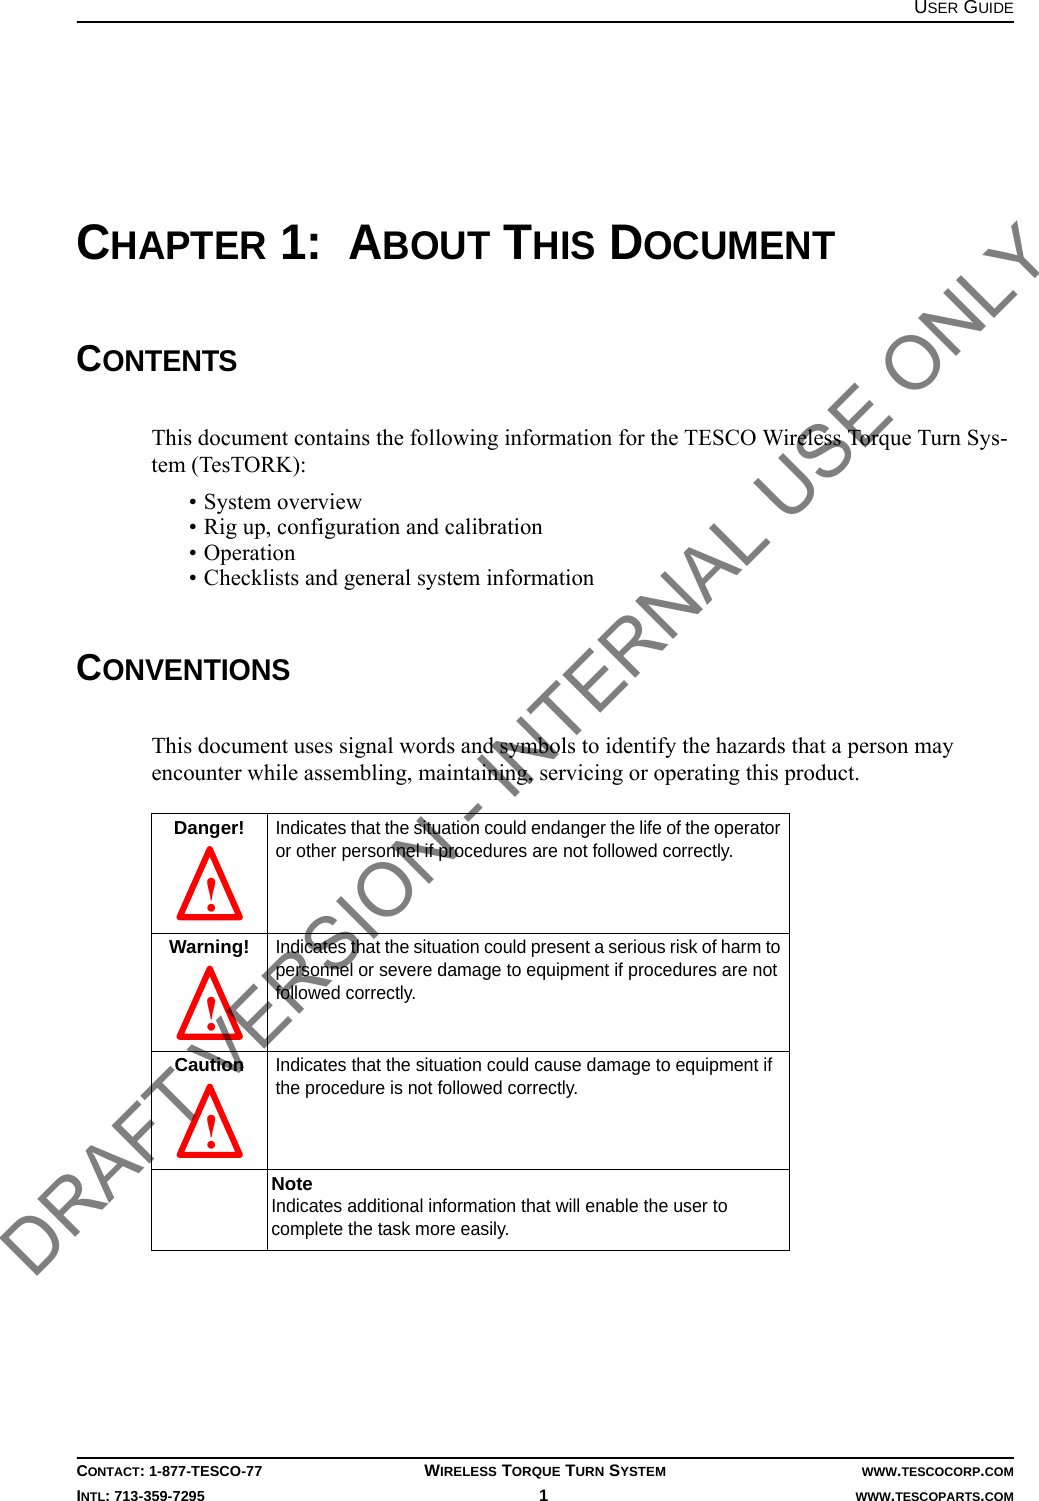 USER GUIDECONTACT: 1-877-TESCO-77 WIRELESS TORQUE TURN SYSTEM WWW.TESCOCORP.COMINTL: 713-359-7295 1   WWW.TESCOPARTS.COMCHAPTER 1:  ABOUT THIS DOCUMENTCONTENTSThis document contains the following information for the TESCO Wireless Torque Turn Sys-tem (TesTORK):• System overview• Rig up, configuration and calibration• Operation• Checklists and general system informationCONVENTIONSThis document uses signal words and symbols to identify the hazards that a person may encounter while assembling, maintaining, servicing or operating this product.Danger!Indicates that the situation could endanger the life of the operator or other personnel if procedures are not followed correctly.Warning!Indicates that the situation could present a serious risk of harm to personnel or severe damage to equipment if procedures are not followed correctly.CautionIndicates that the situation could cause damage to equipment if the procedure is not followed correctly.NoteIndicates additional information that will enable the user to complete the task more easily. !  !  ! DRAFT VERSION - INTERNAL USE ONLY